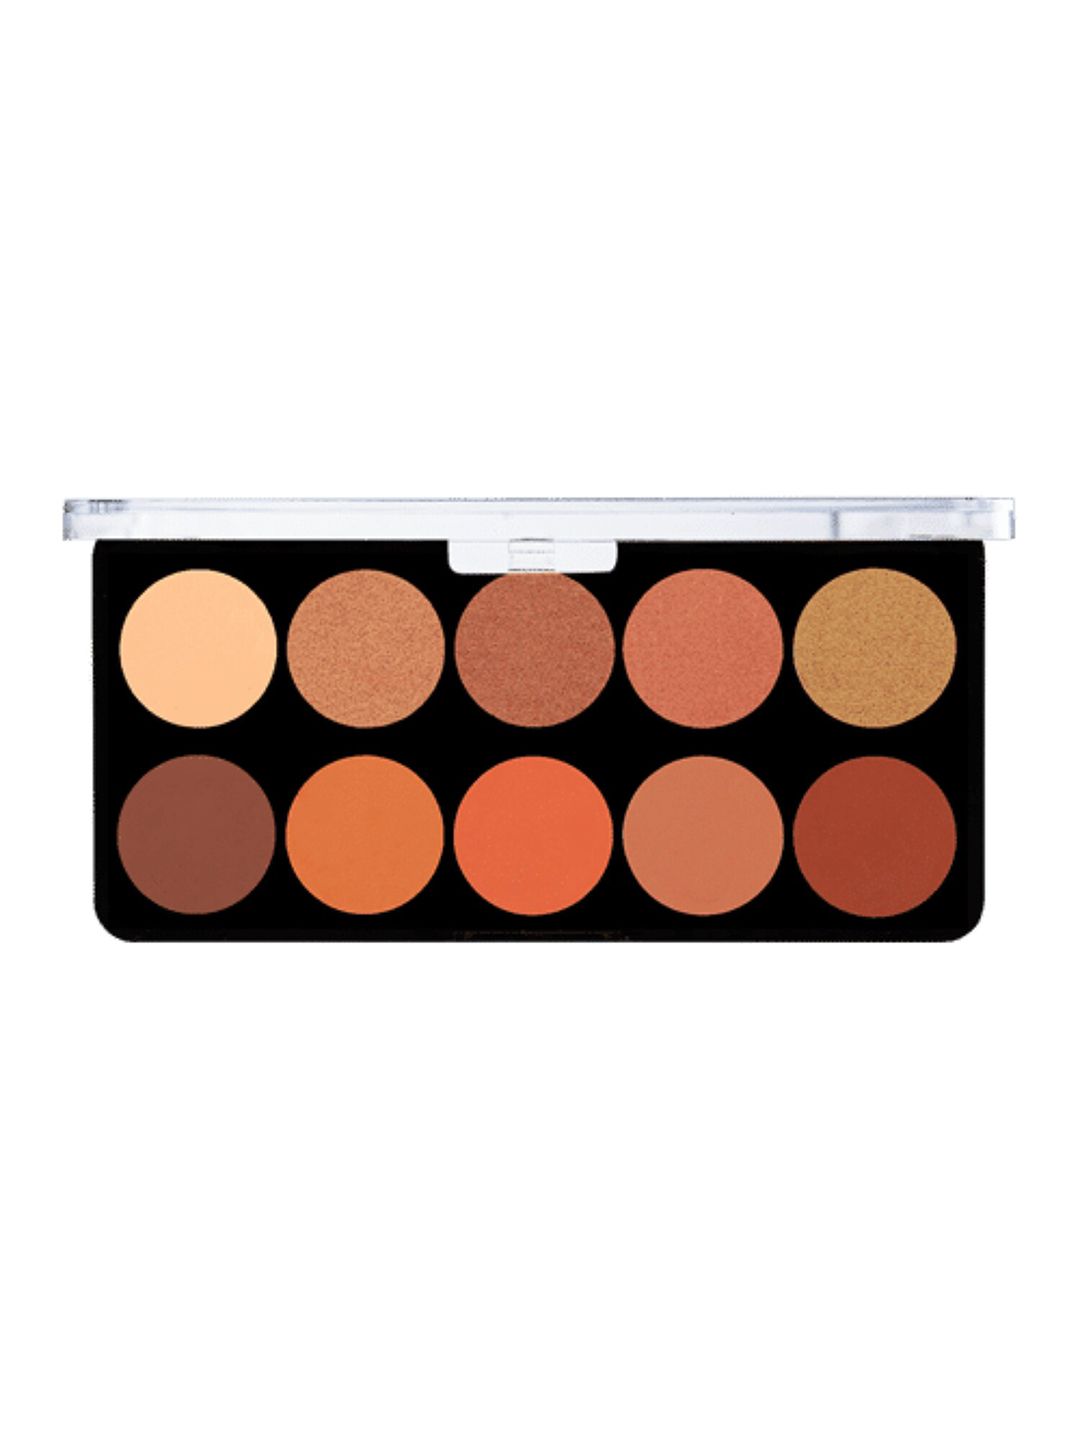 Sivanna Colors The Elegant Eyeshadow Palette - HF377 01 Price in India